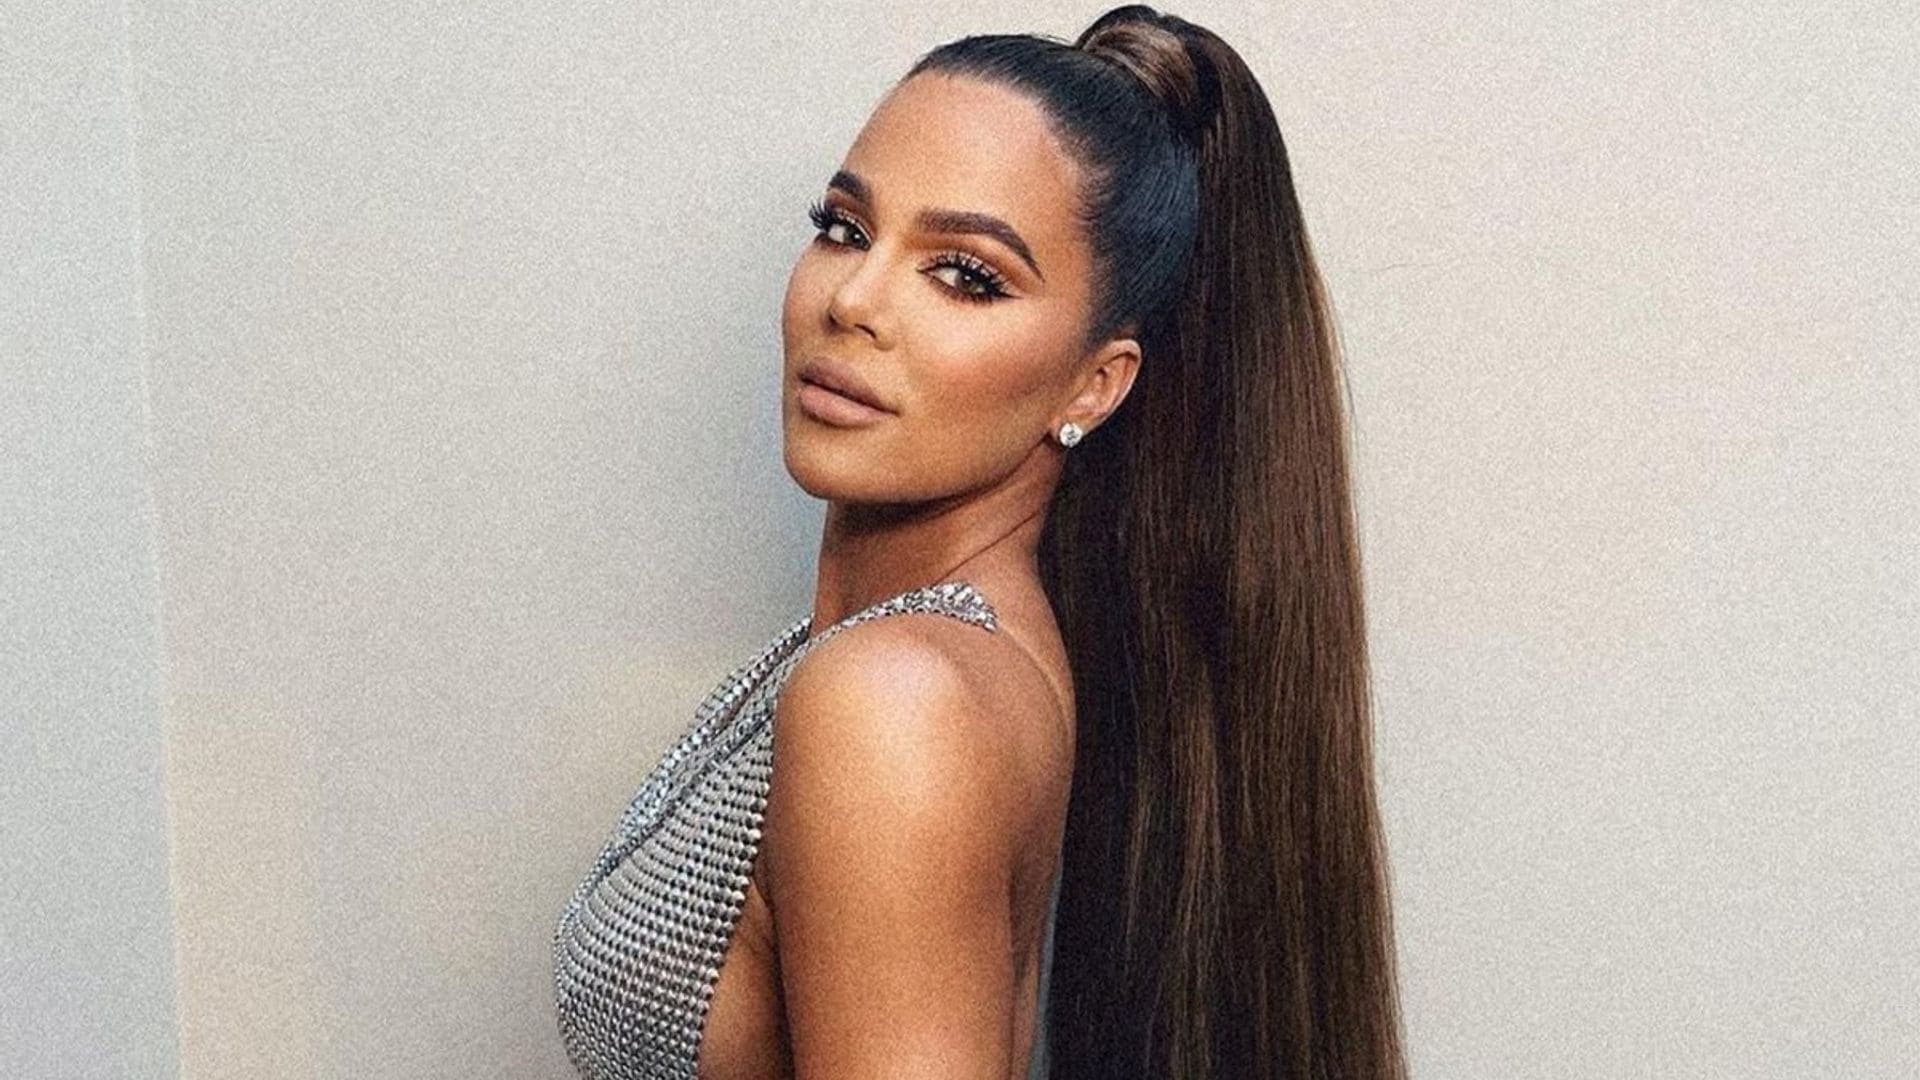 Khloé Kardashian claps back at the accidental bikini photo that was posted of her